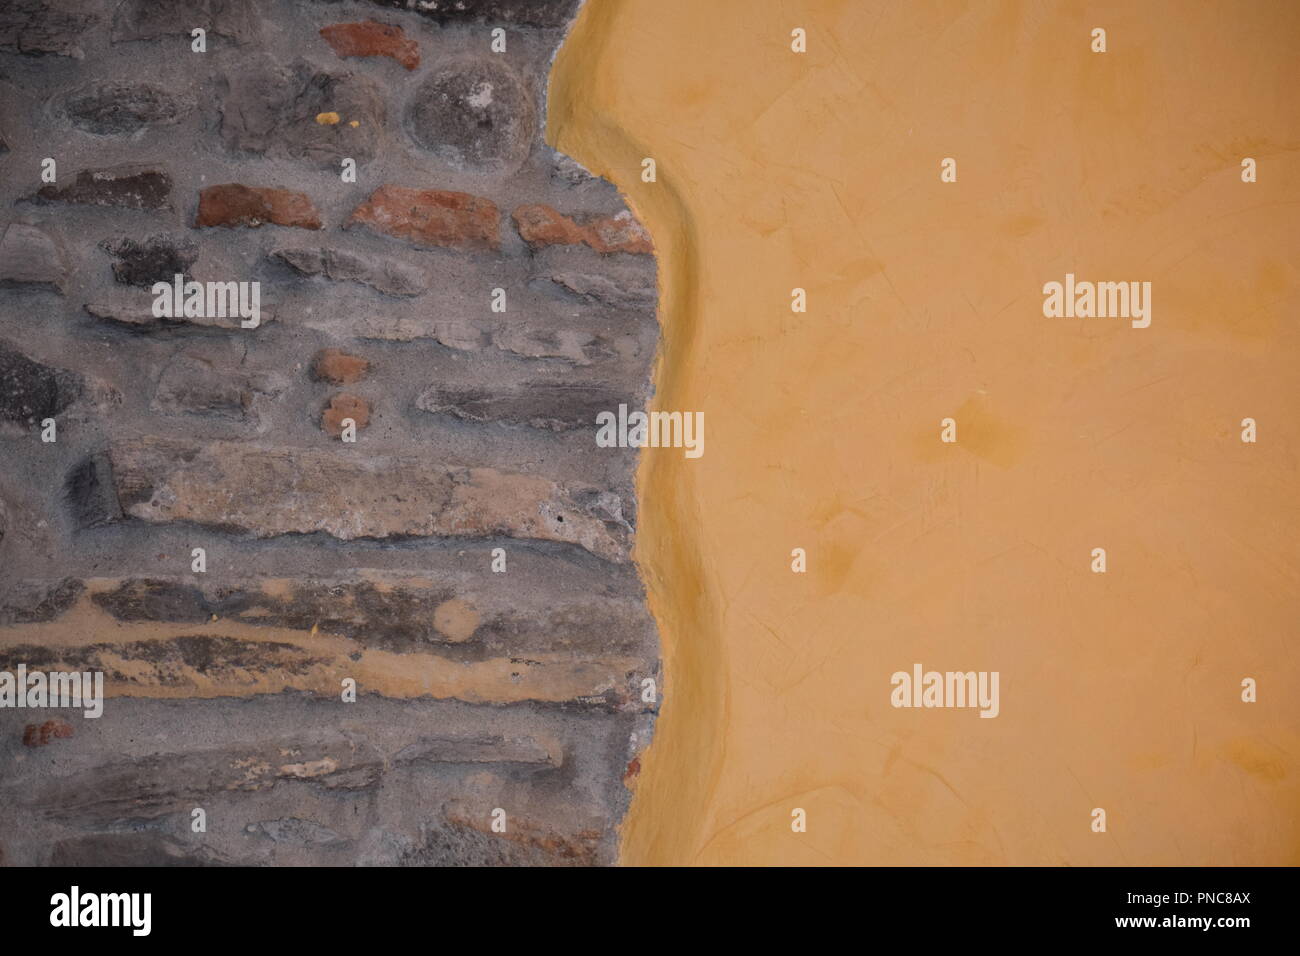 Contrasting Wall Coverings - Open Brick, Yellow paint Stock Photo